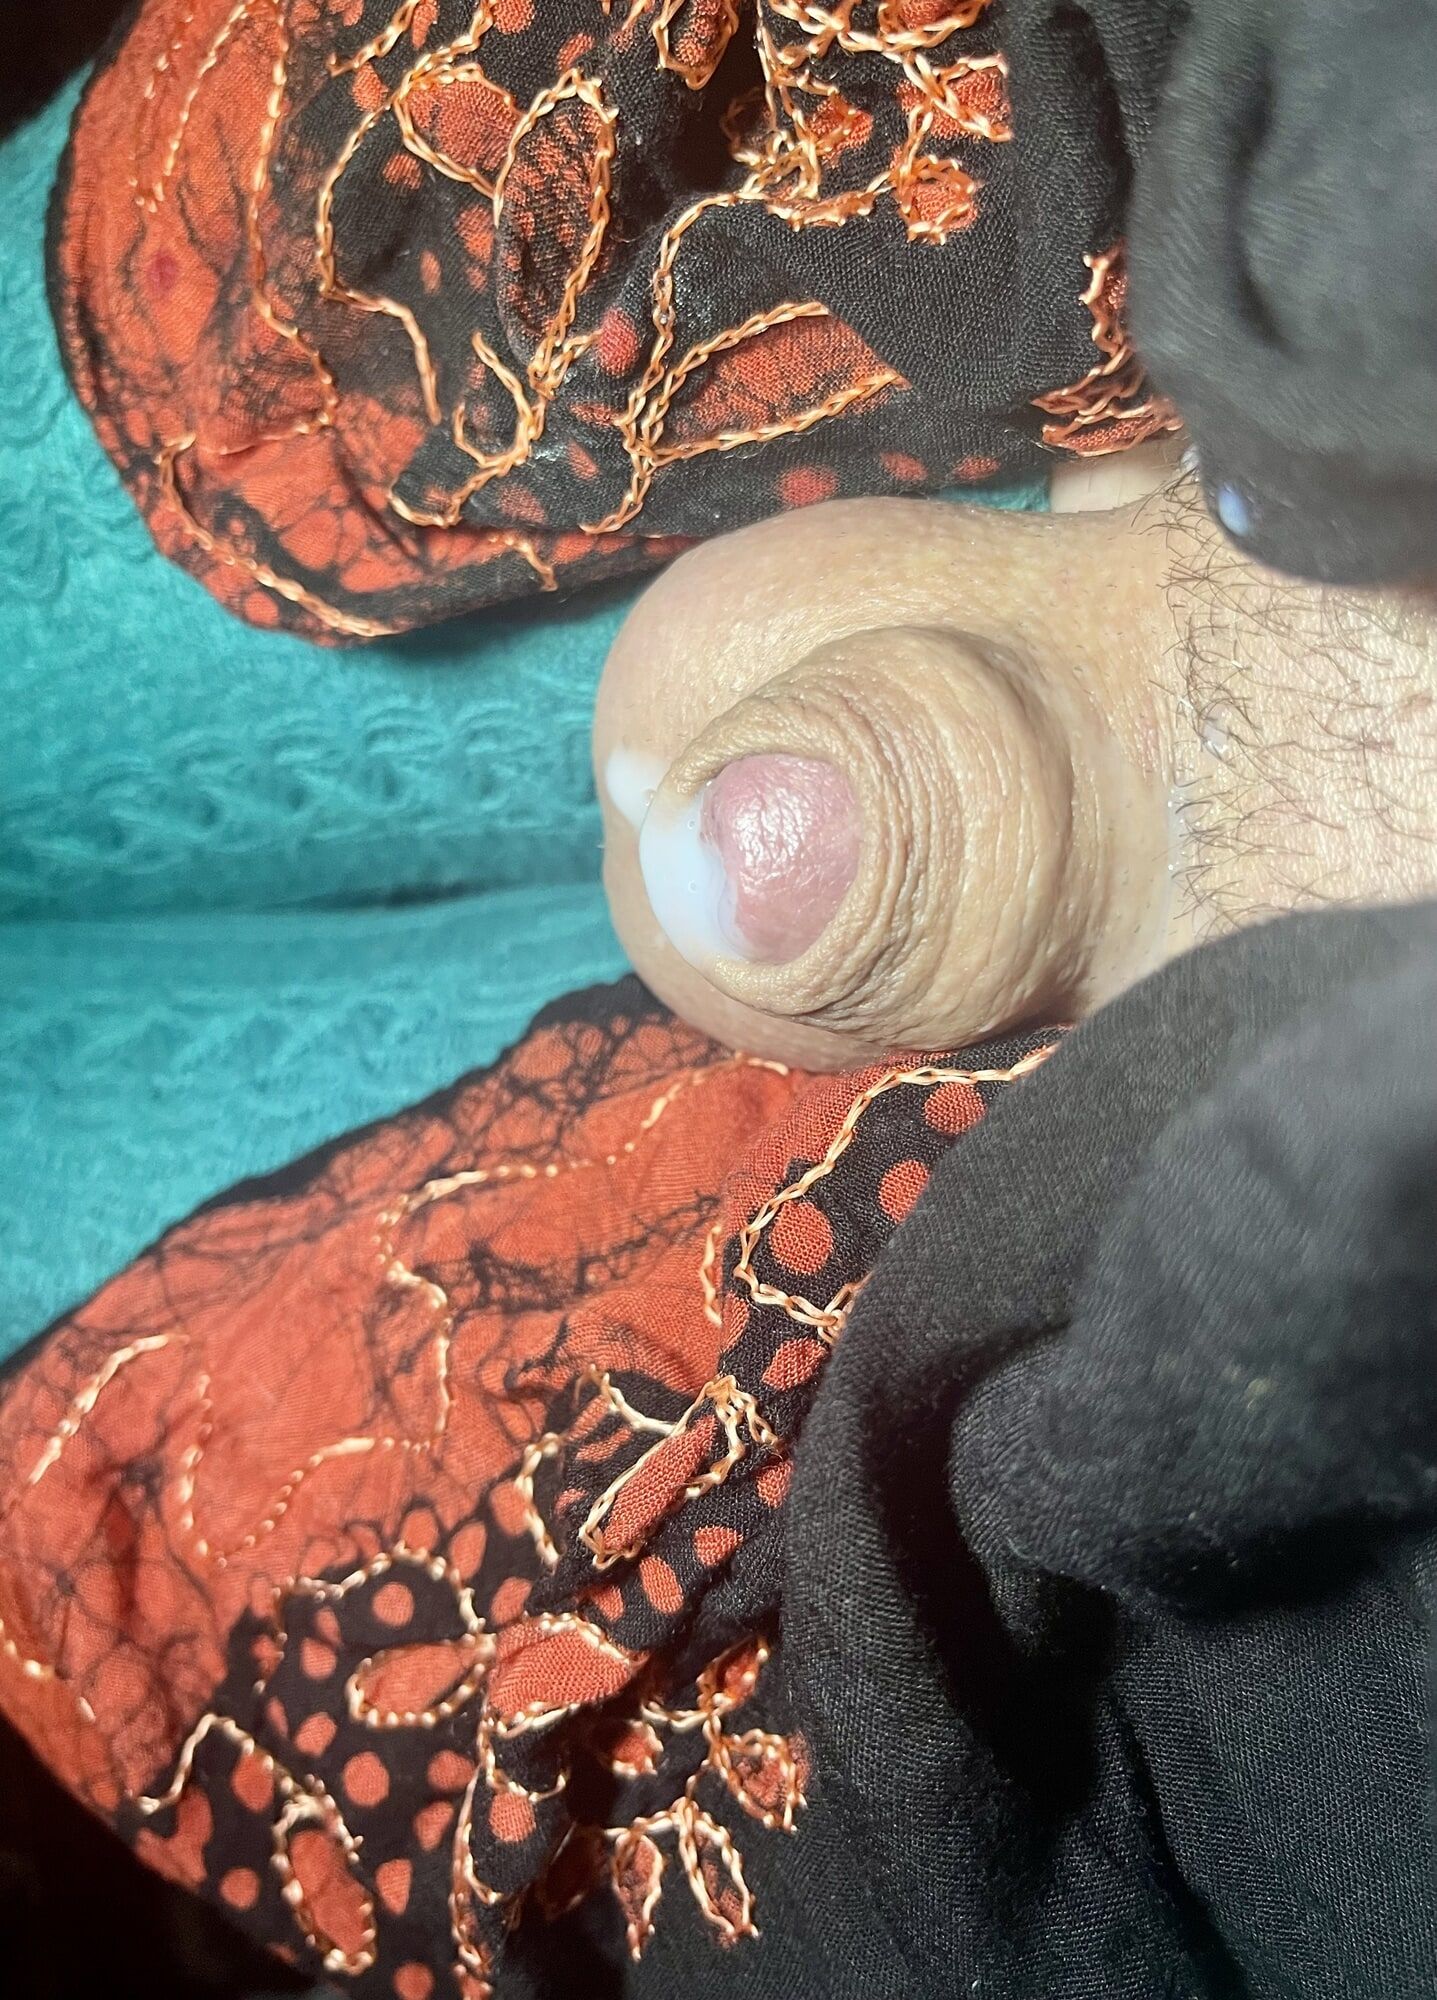 Tiny cock bitch dick any takers #18